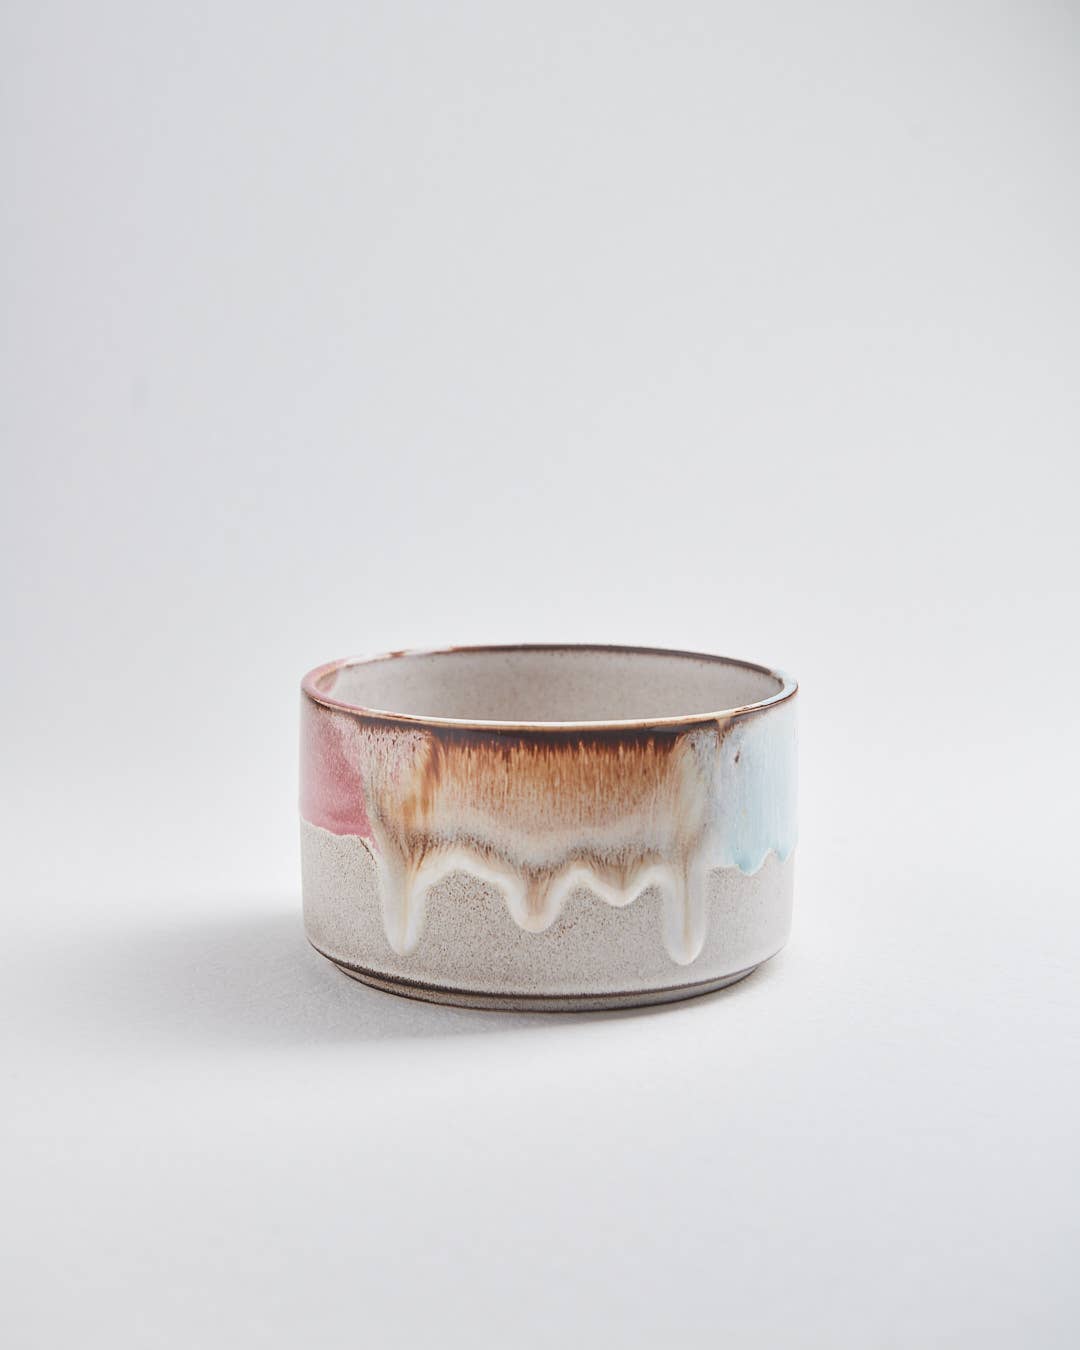 The Every Space stoneware handmade ceramic Melting Ice Cream Bowl by Egg Back Home in Pink & Blue is made in Portugal